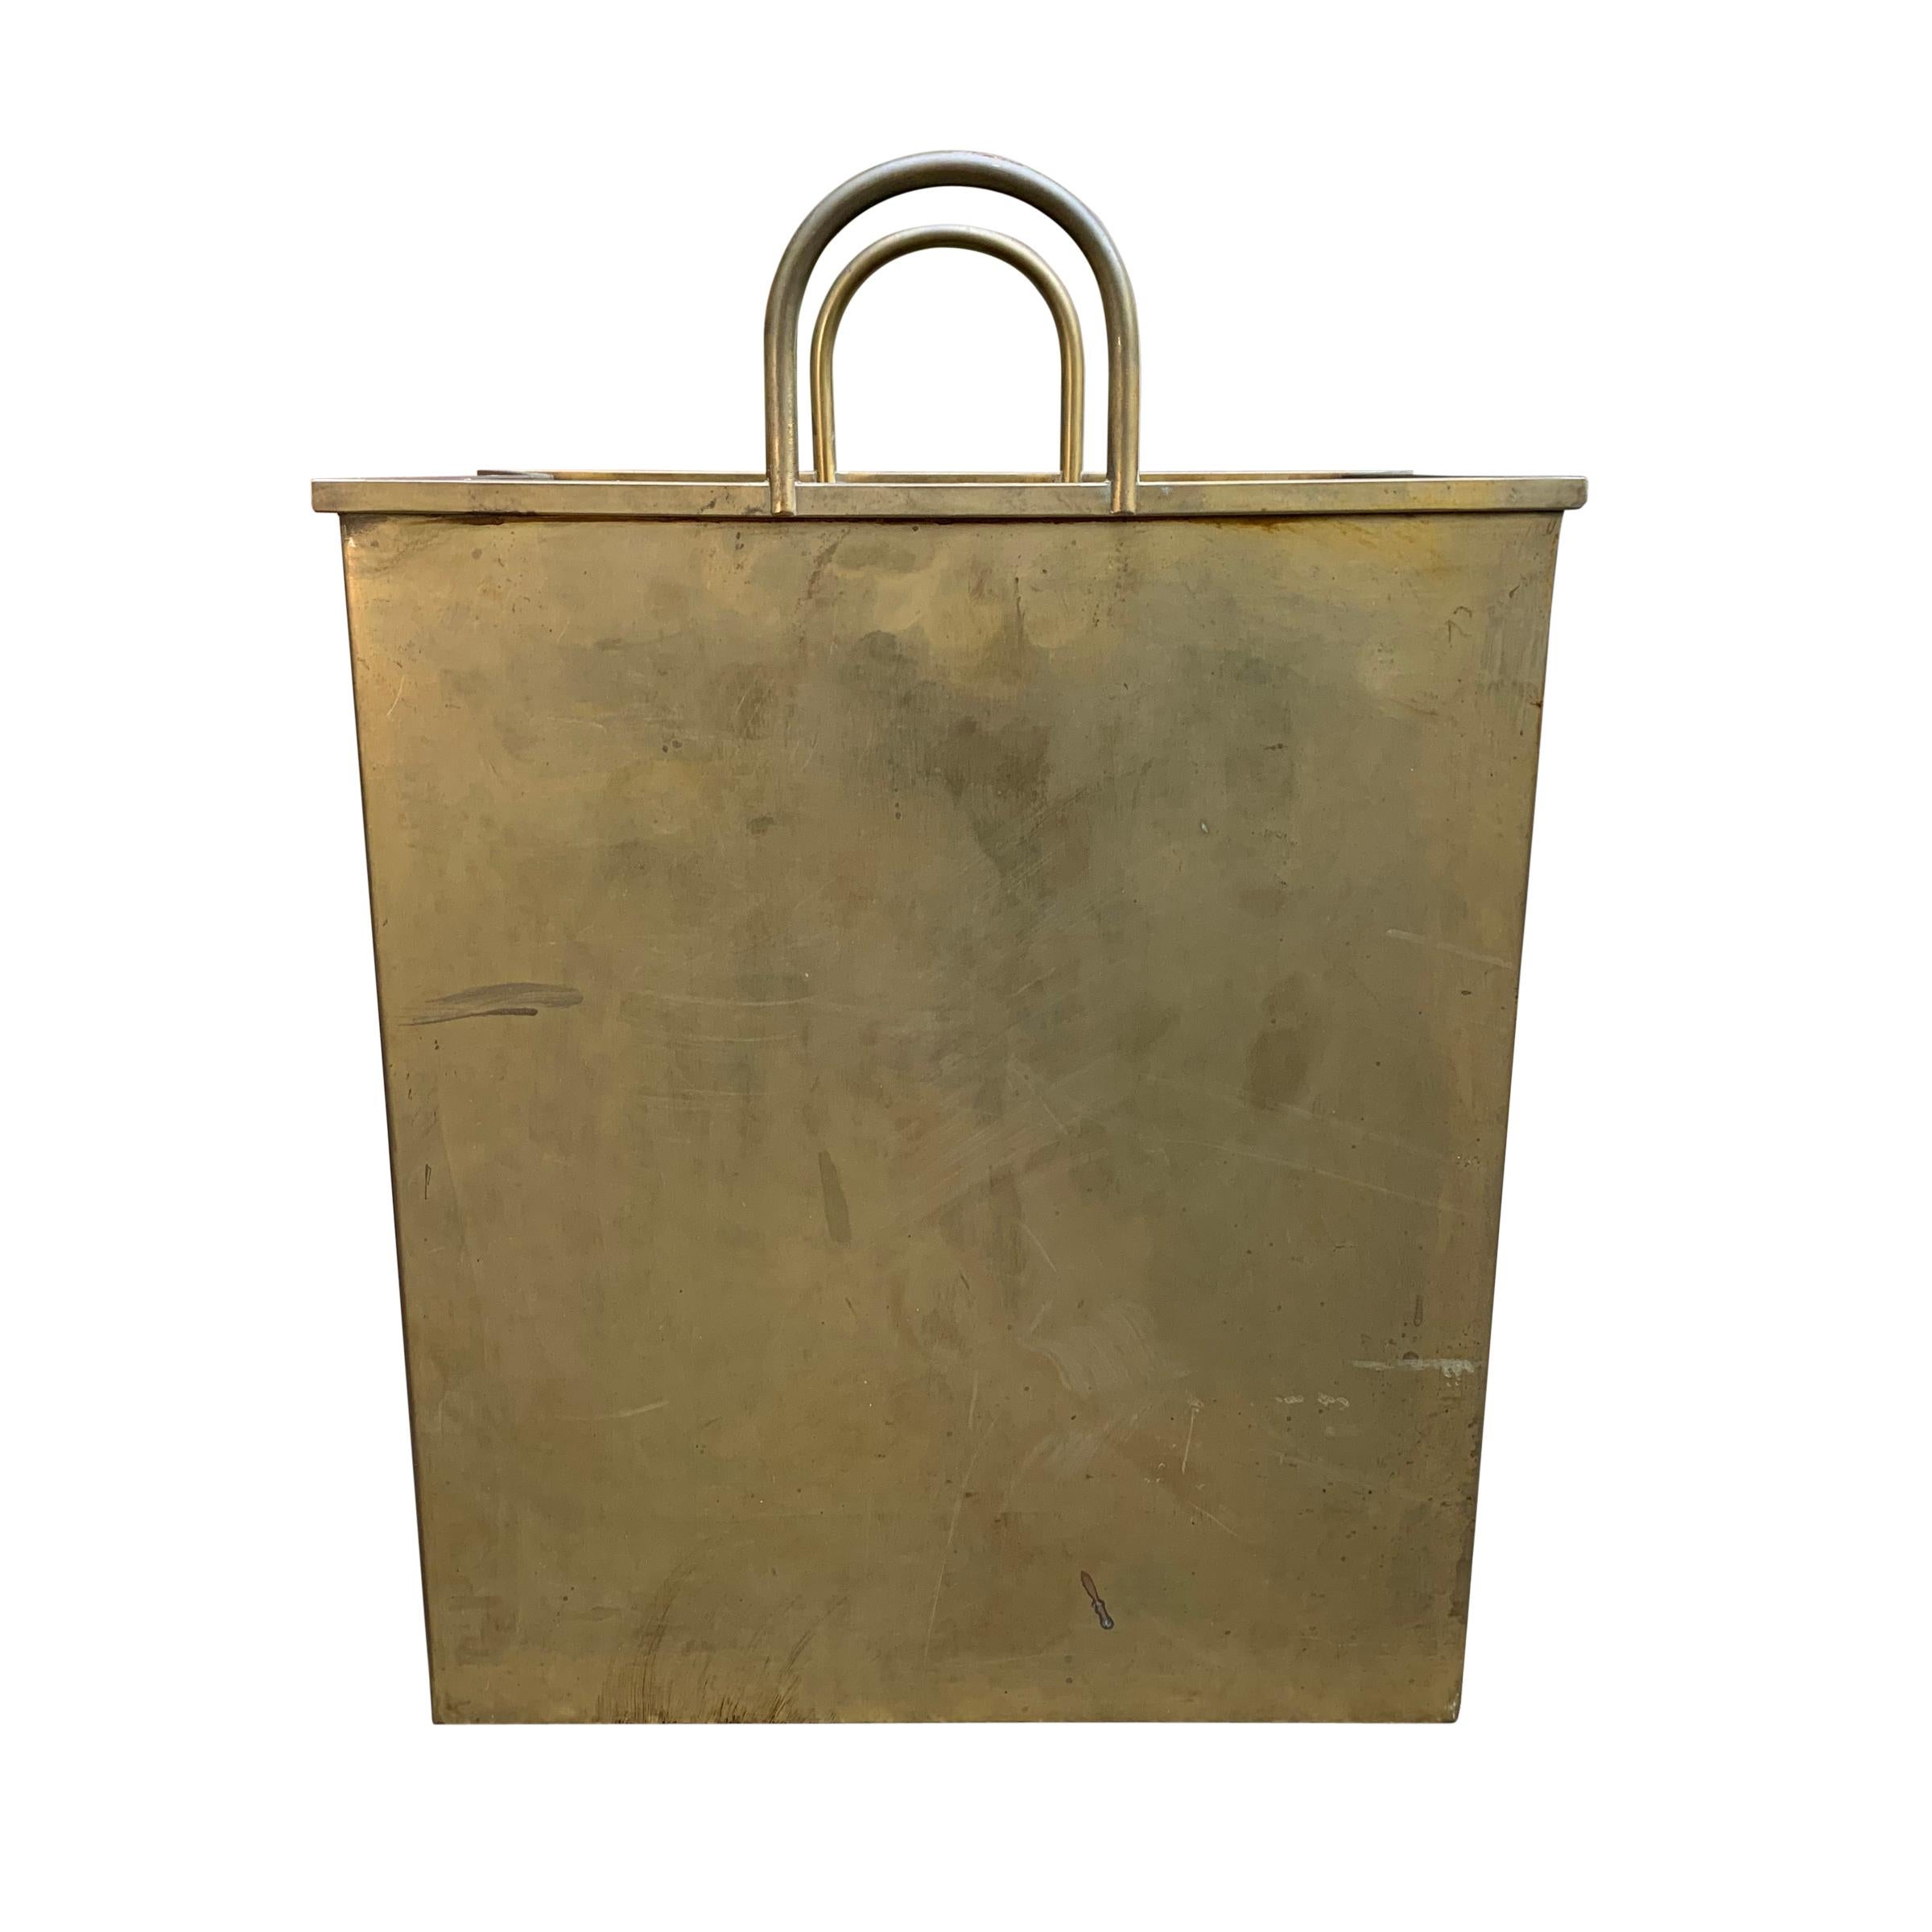 A whimsical vintage Italian brass wastepaper basket in the form of a folded shopping bag with two handles. The perfect pop-art accessory for your office or home!